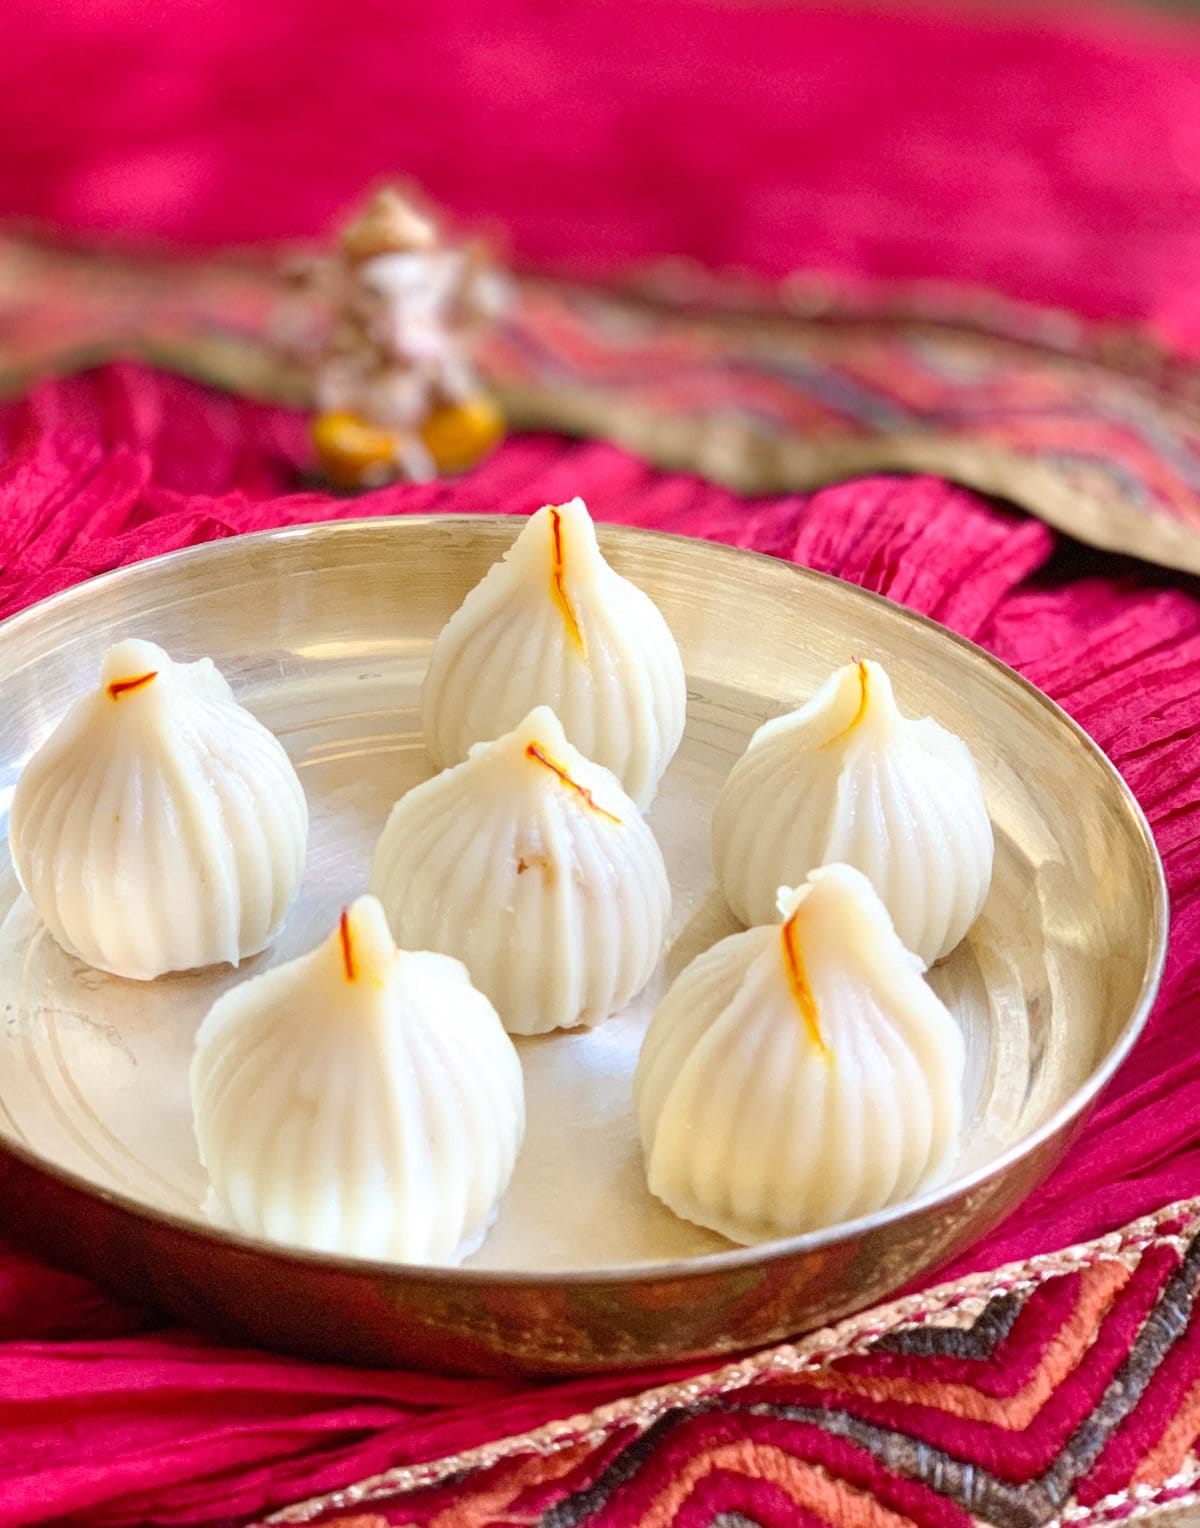 Modak served in a silver plate with Ganesha statue on the back